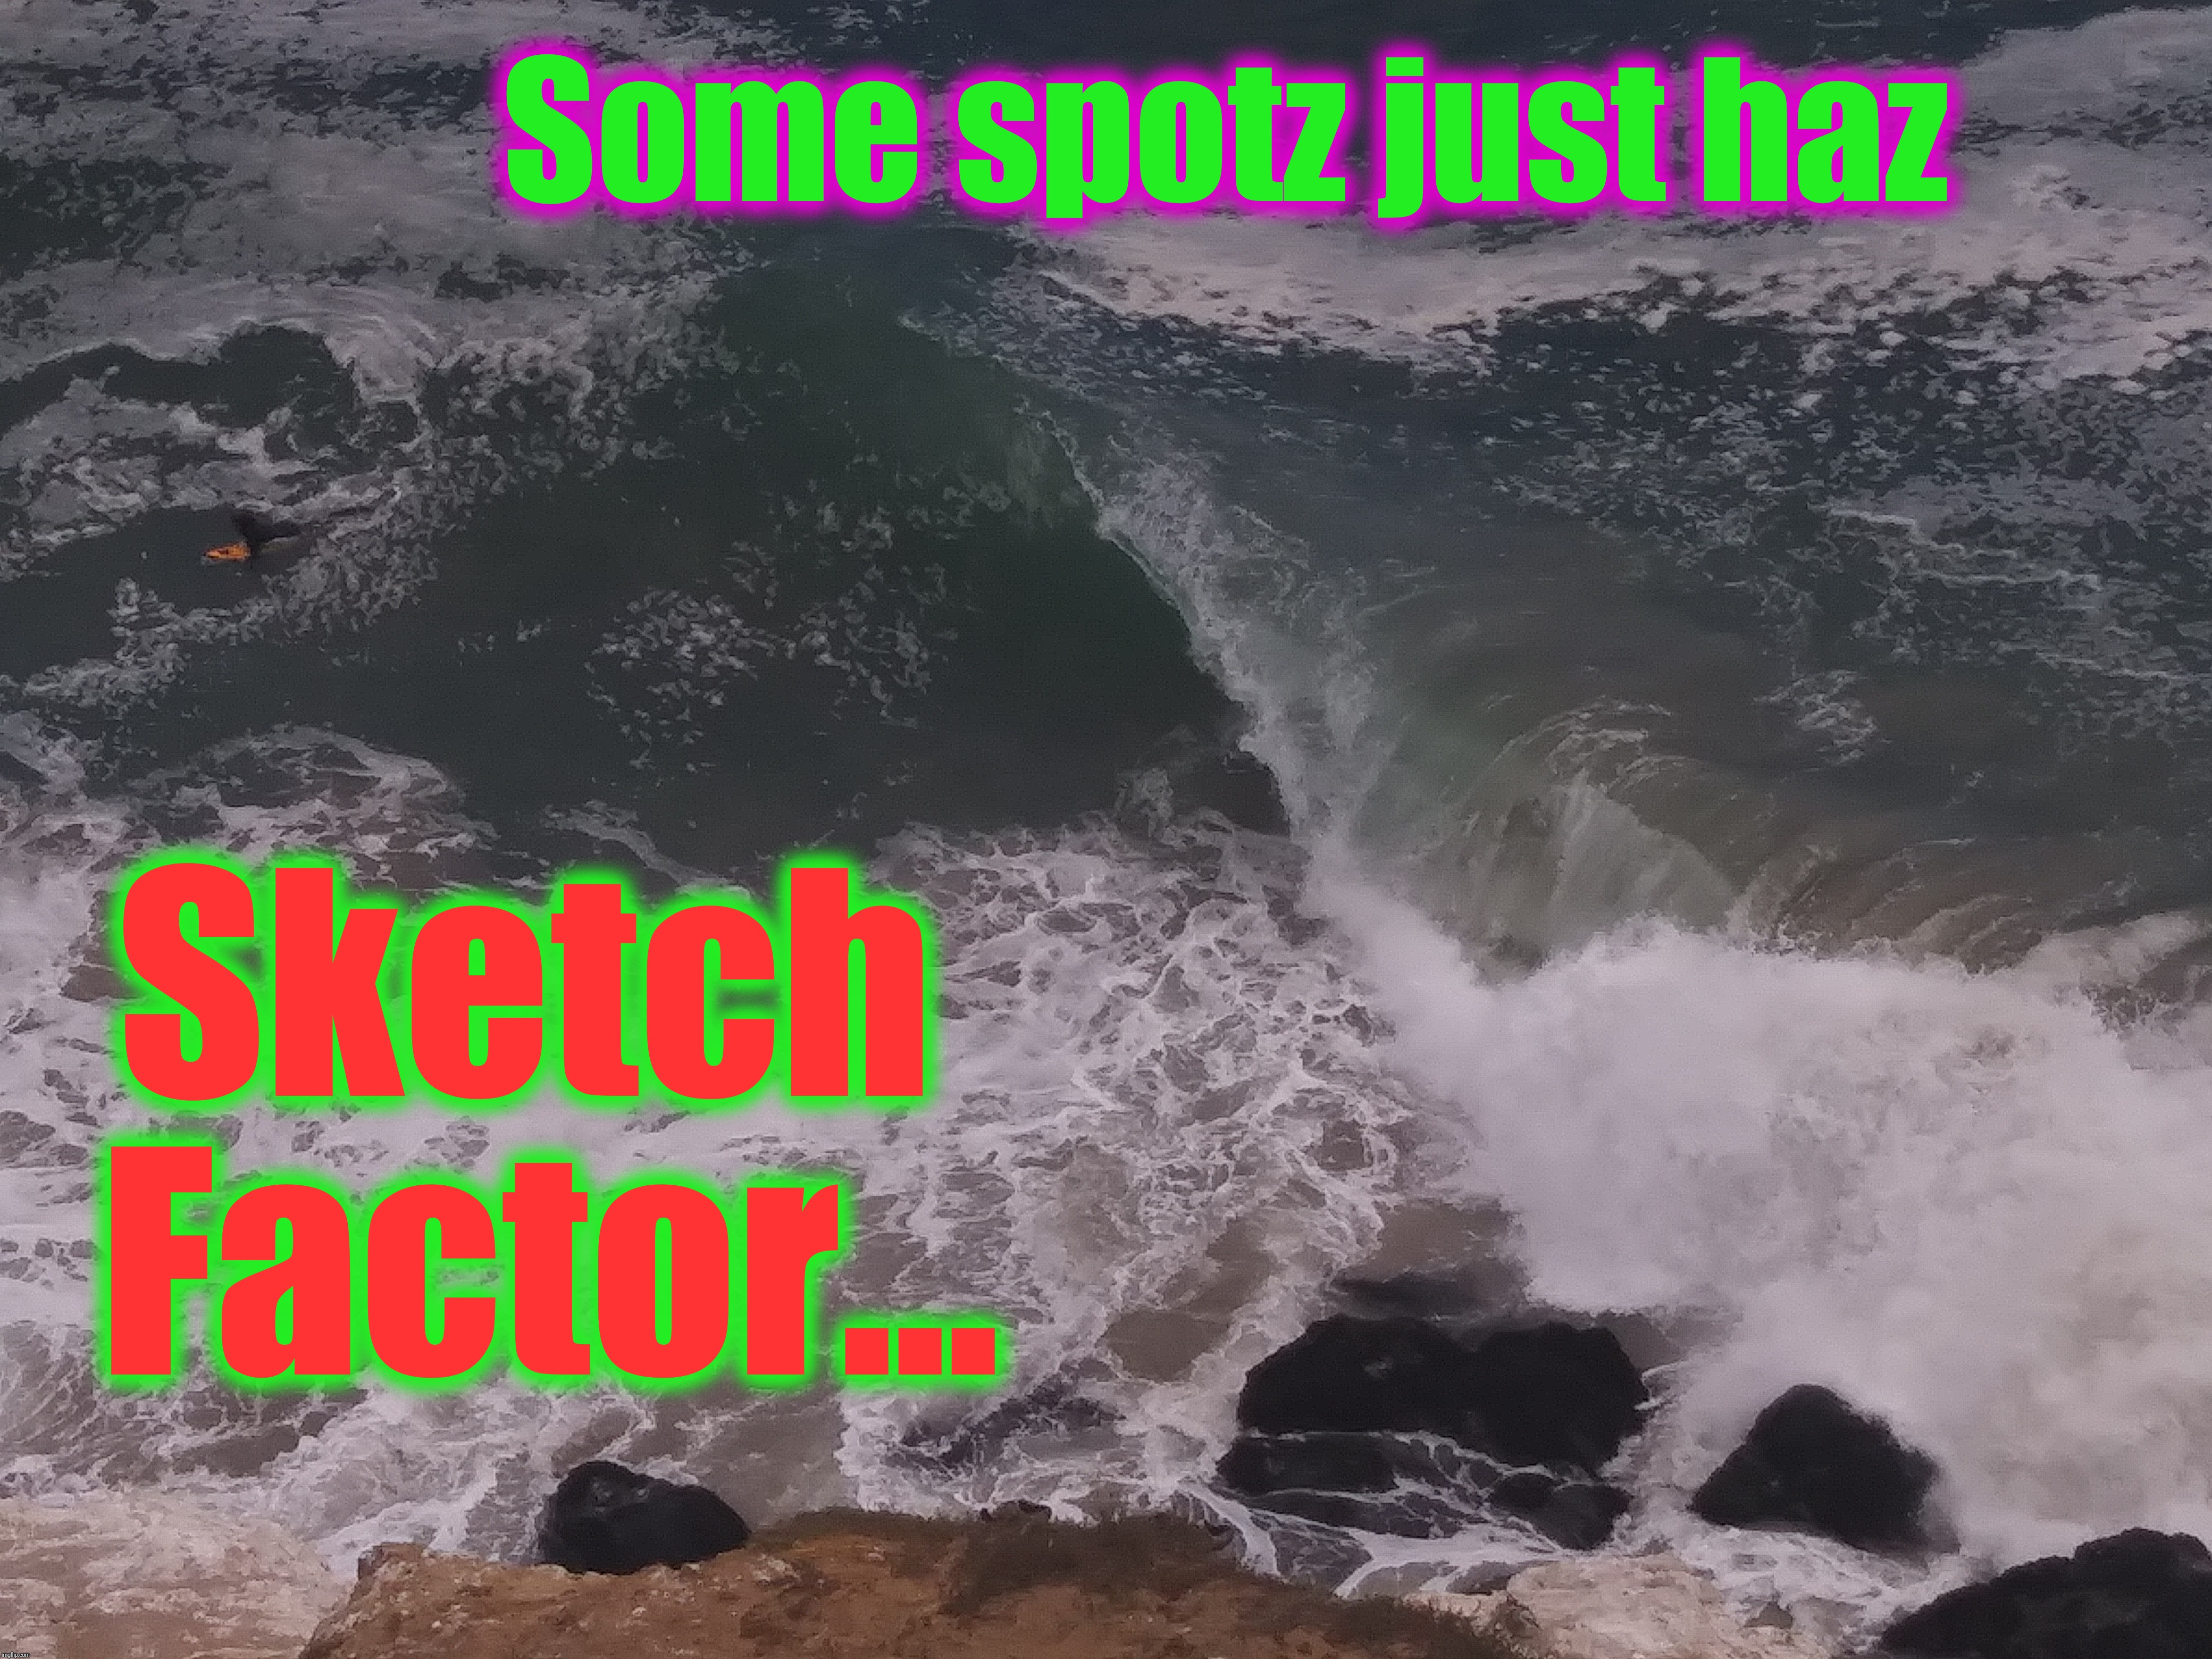 Where you're looking is where you're going... Don't look down.  | Some spotz just haz; Sketch Factor... | image tagged in extreme sports,charlie don't surf,so i guess you can say things are getting pretty serious,memes,heavy,barrel racing | made w/ Imgflip meme maker